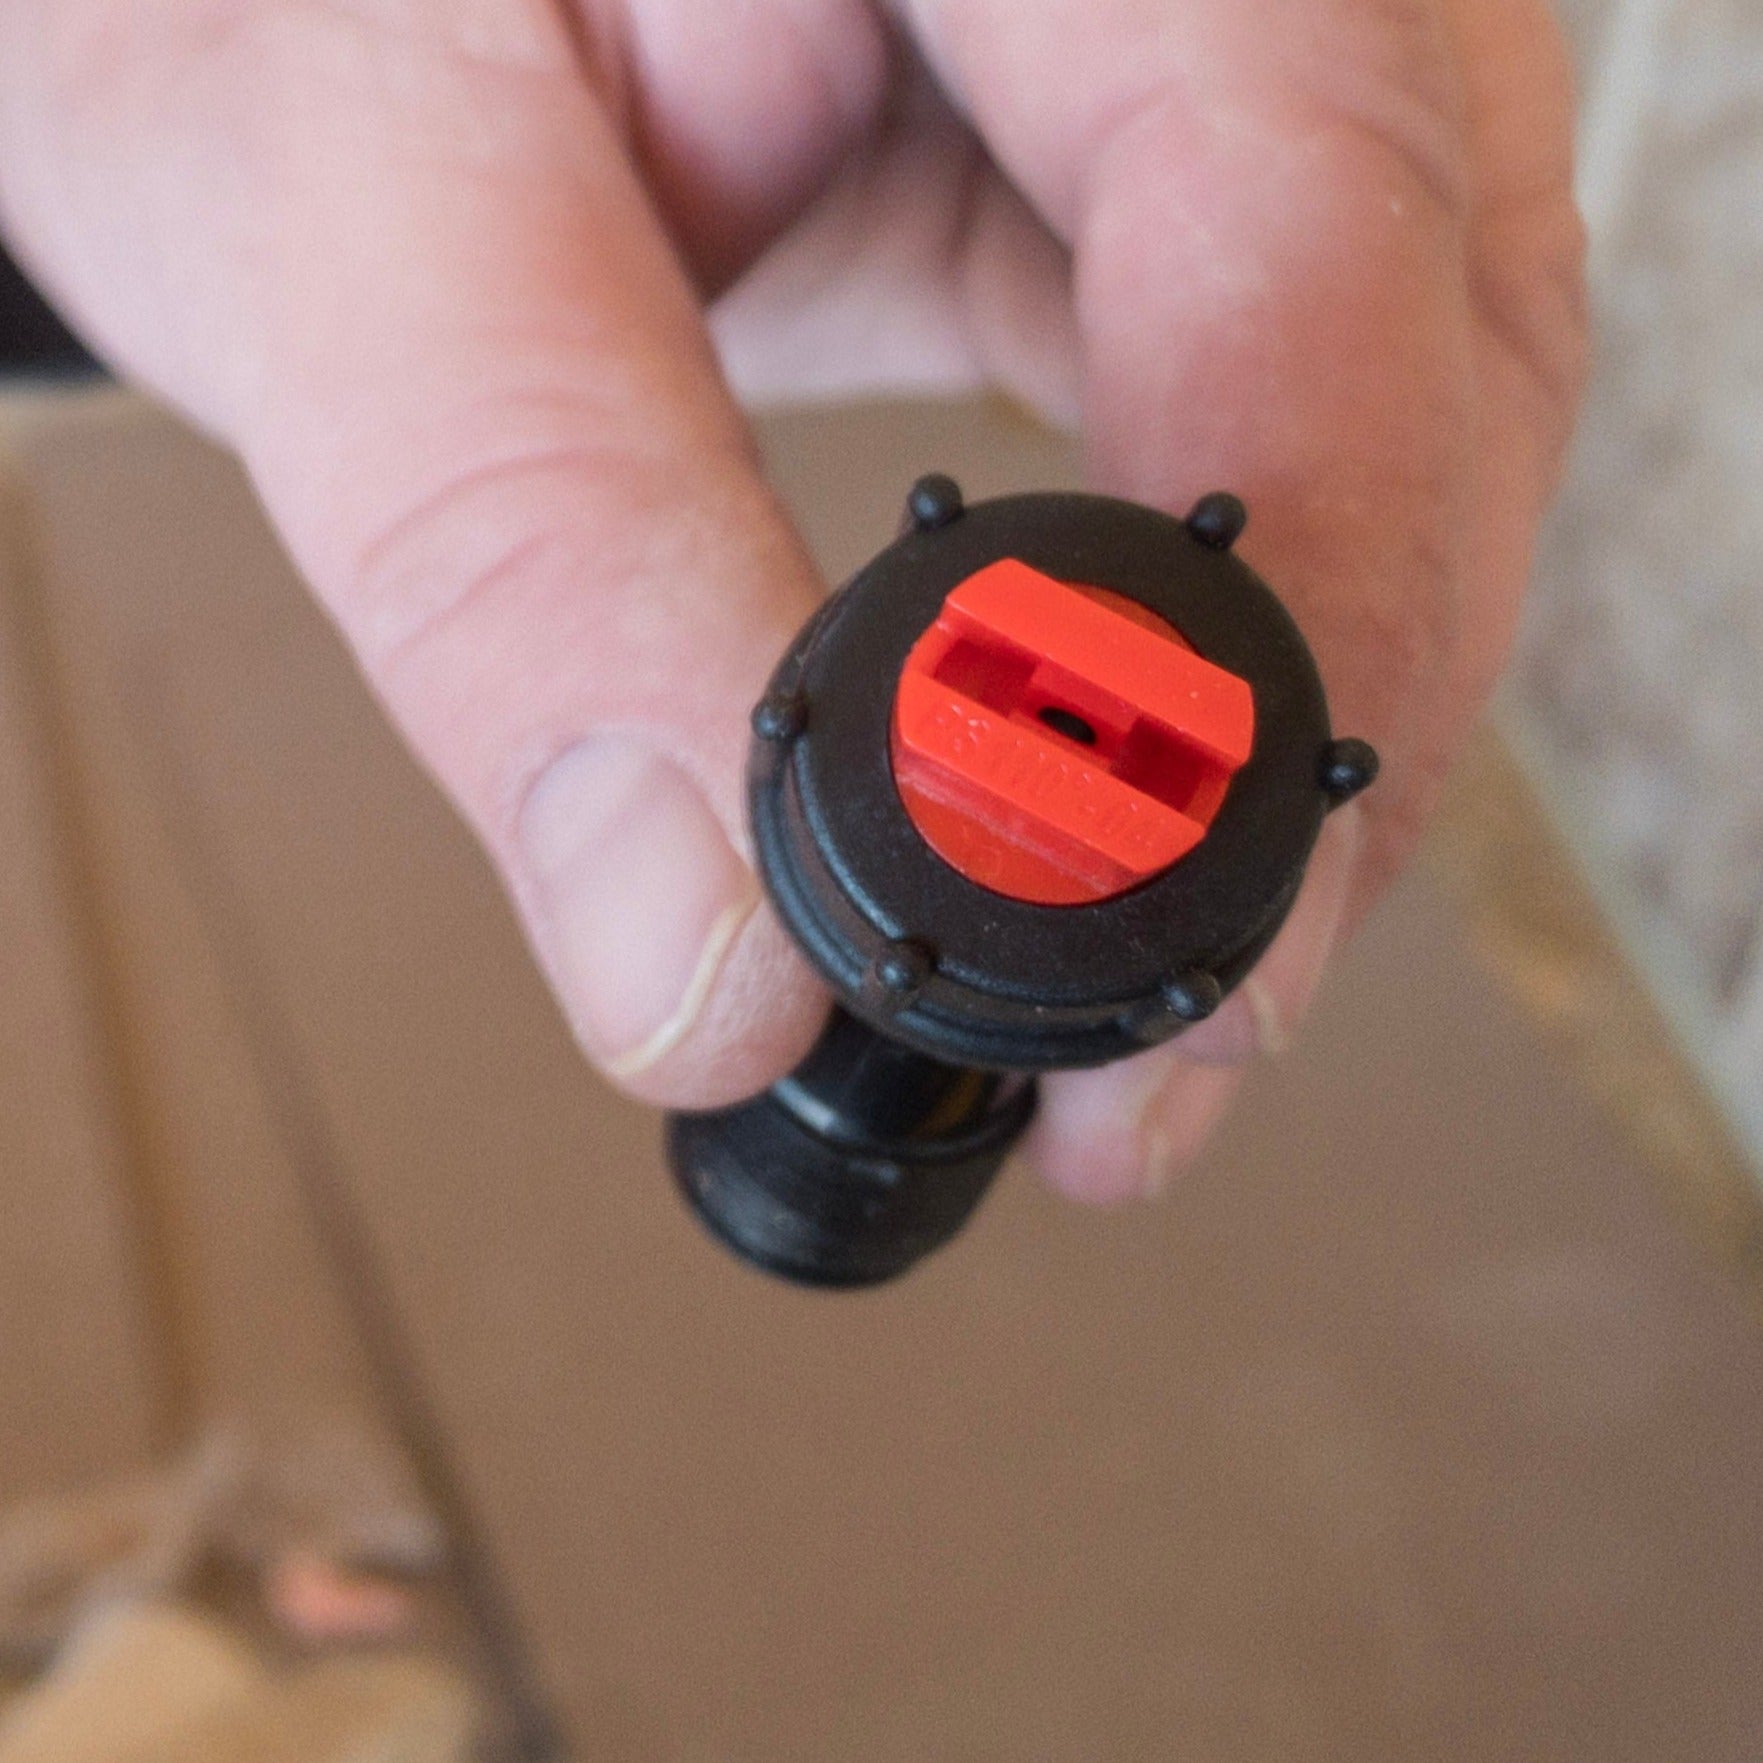 Quick-Connect to 110-Degree TeeJet Nozzle Adapter